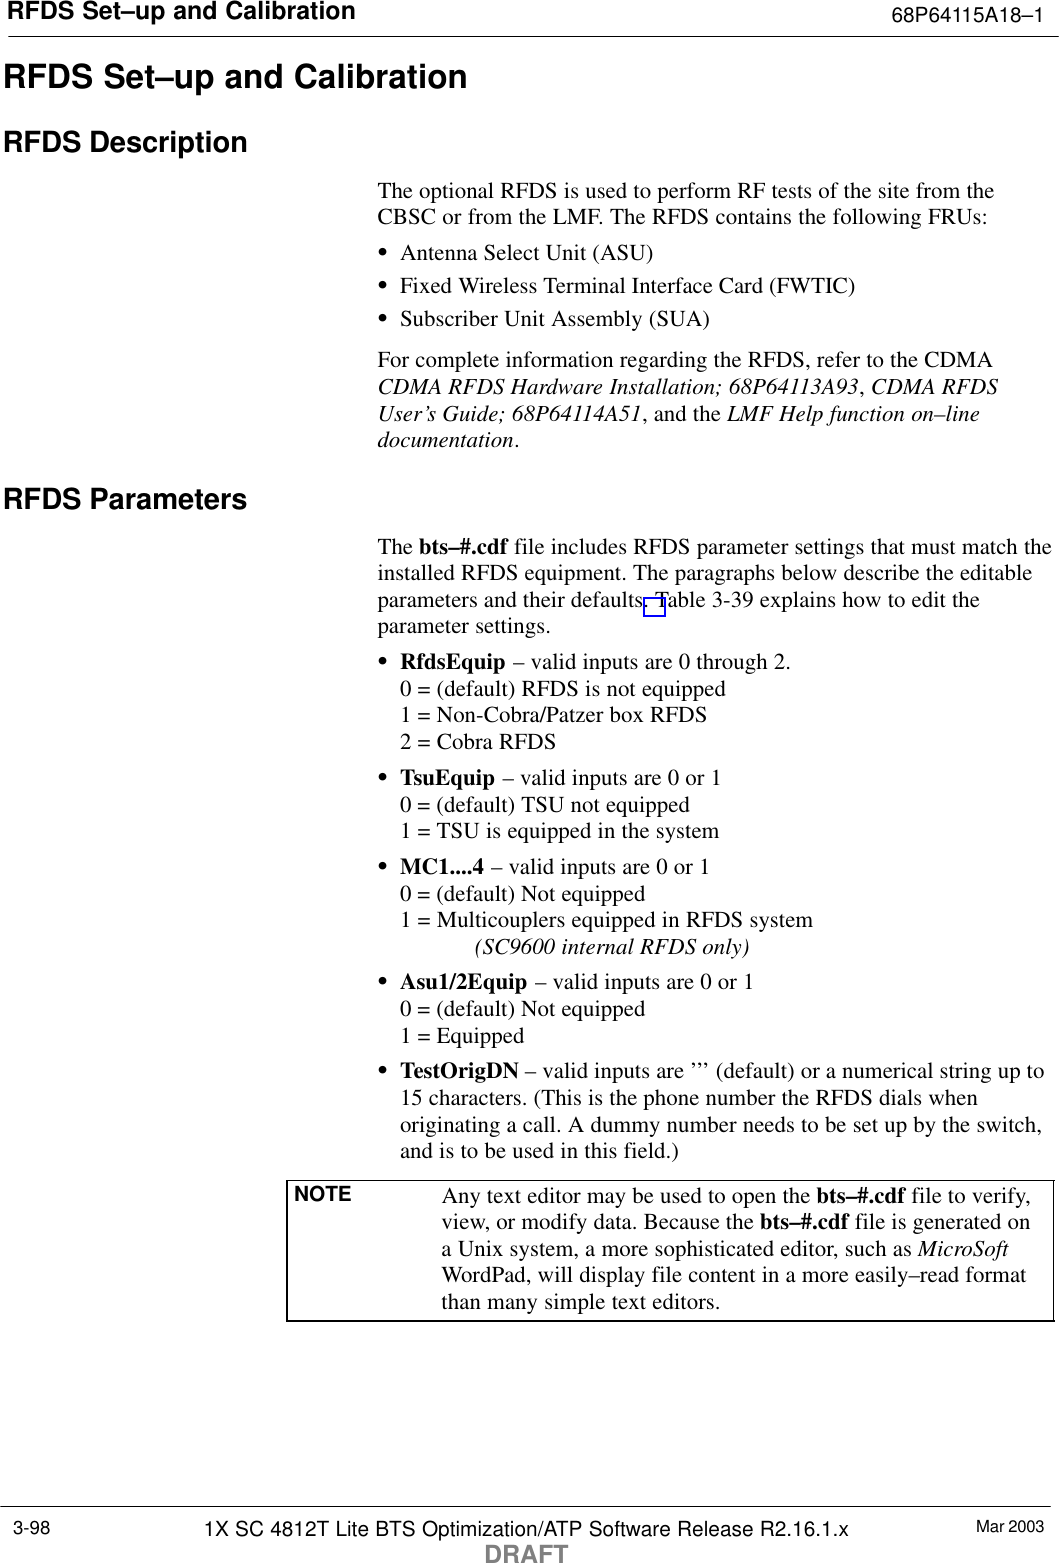 RFDS Set–up and Calibration 68P64115A18–1Mar 20031X SC 4812T Lite BTS Optimization/ATP Software Release R2.16.1.xDRAFT3-98RFDS Set–up and CalibrationRFDS DescriptionThe optional RFDS is used to perform RF tests of the site from theCBSC or from the LMF. The RFDS contains the following FRUs:SAntenna Select Unit (ASU)SFixed Wireless Terminal Interface Card (FWTIC)SSubscriber Unit Assembly (SUA)For complete information regarding the RFDS, refer to the CDMACDMA RFDS Hardware Installation; 68P64113A93, CDMA RFDSUser’s Guide; 68P64114A51, and the LMF Help function on–linedocumentation.RFDS ParametersThe bts–#.cdf file includes RFDS parameter settings that must match theinstalled RFDS equipment. The paragraphs below describe the editableparameters and their defaults. Table 3-39 explains how to edit theparameter settings.SRfdsEquip – valid inputs are 0 through 2.0 = (default) RFDS is not equipped1 = Non-Cobra/Patzer box RFDS2 = Cobra RFDSSTsuEquip – valid inputs are 0 or 10 = (default) TSU not equipped1 = TSU is equipped in the systemSMC1....4 – valid inputs are 0 or 10 = (default) Not equipped1 = Multicouplers equipped in RFDS system (SC9600 internal RFDS only)SAsu1/2Equip – valid inputs are 0 or 10 = (default) Not equipped1 = EquippedSTestOrigDN – valid inputs are ’’’ (default) or a numerical string up to15 characters. (This is the phone number the RFDS dials whenoriginating a call. A dummy number needs to be set up by the switch,and is to be used in this field.)NOTE Any text editor may be used to open the bts–#.cdf file to verify,view, or modify data. Because the bts–#.cdf file is generated ona Unix system, a more sophisticated editor, such as MicroSoftWordPad, will display file content in a more easily–read formatthan many simple text editors.